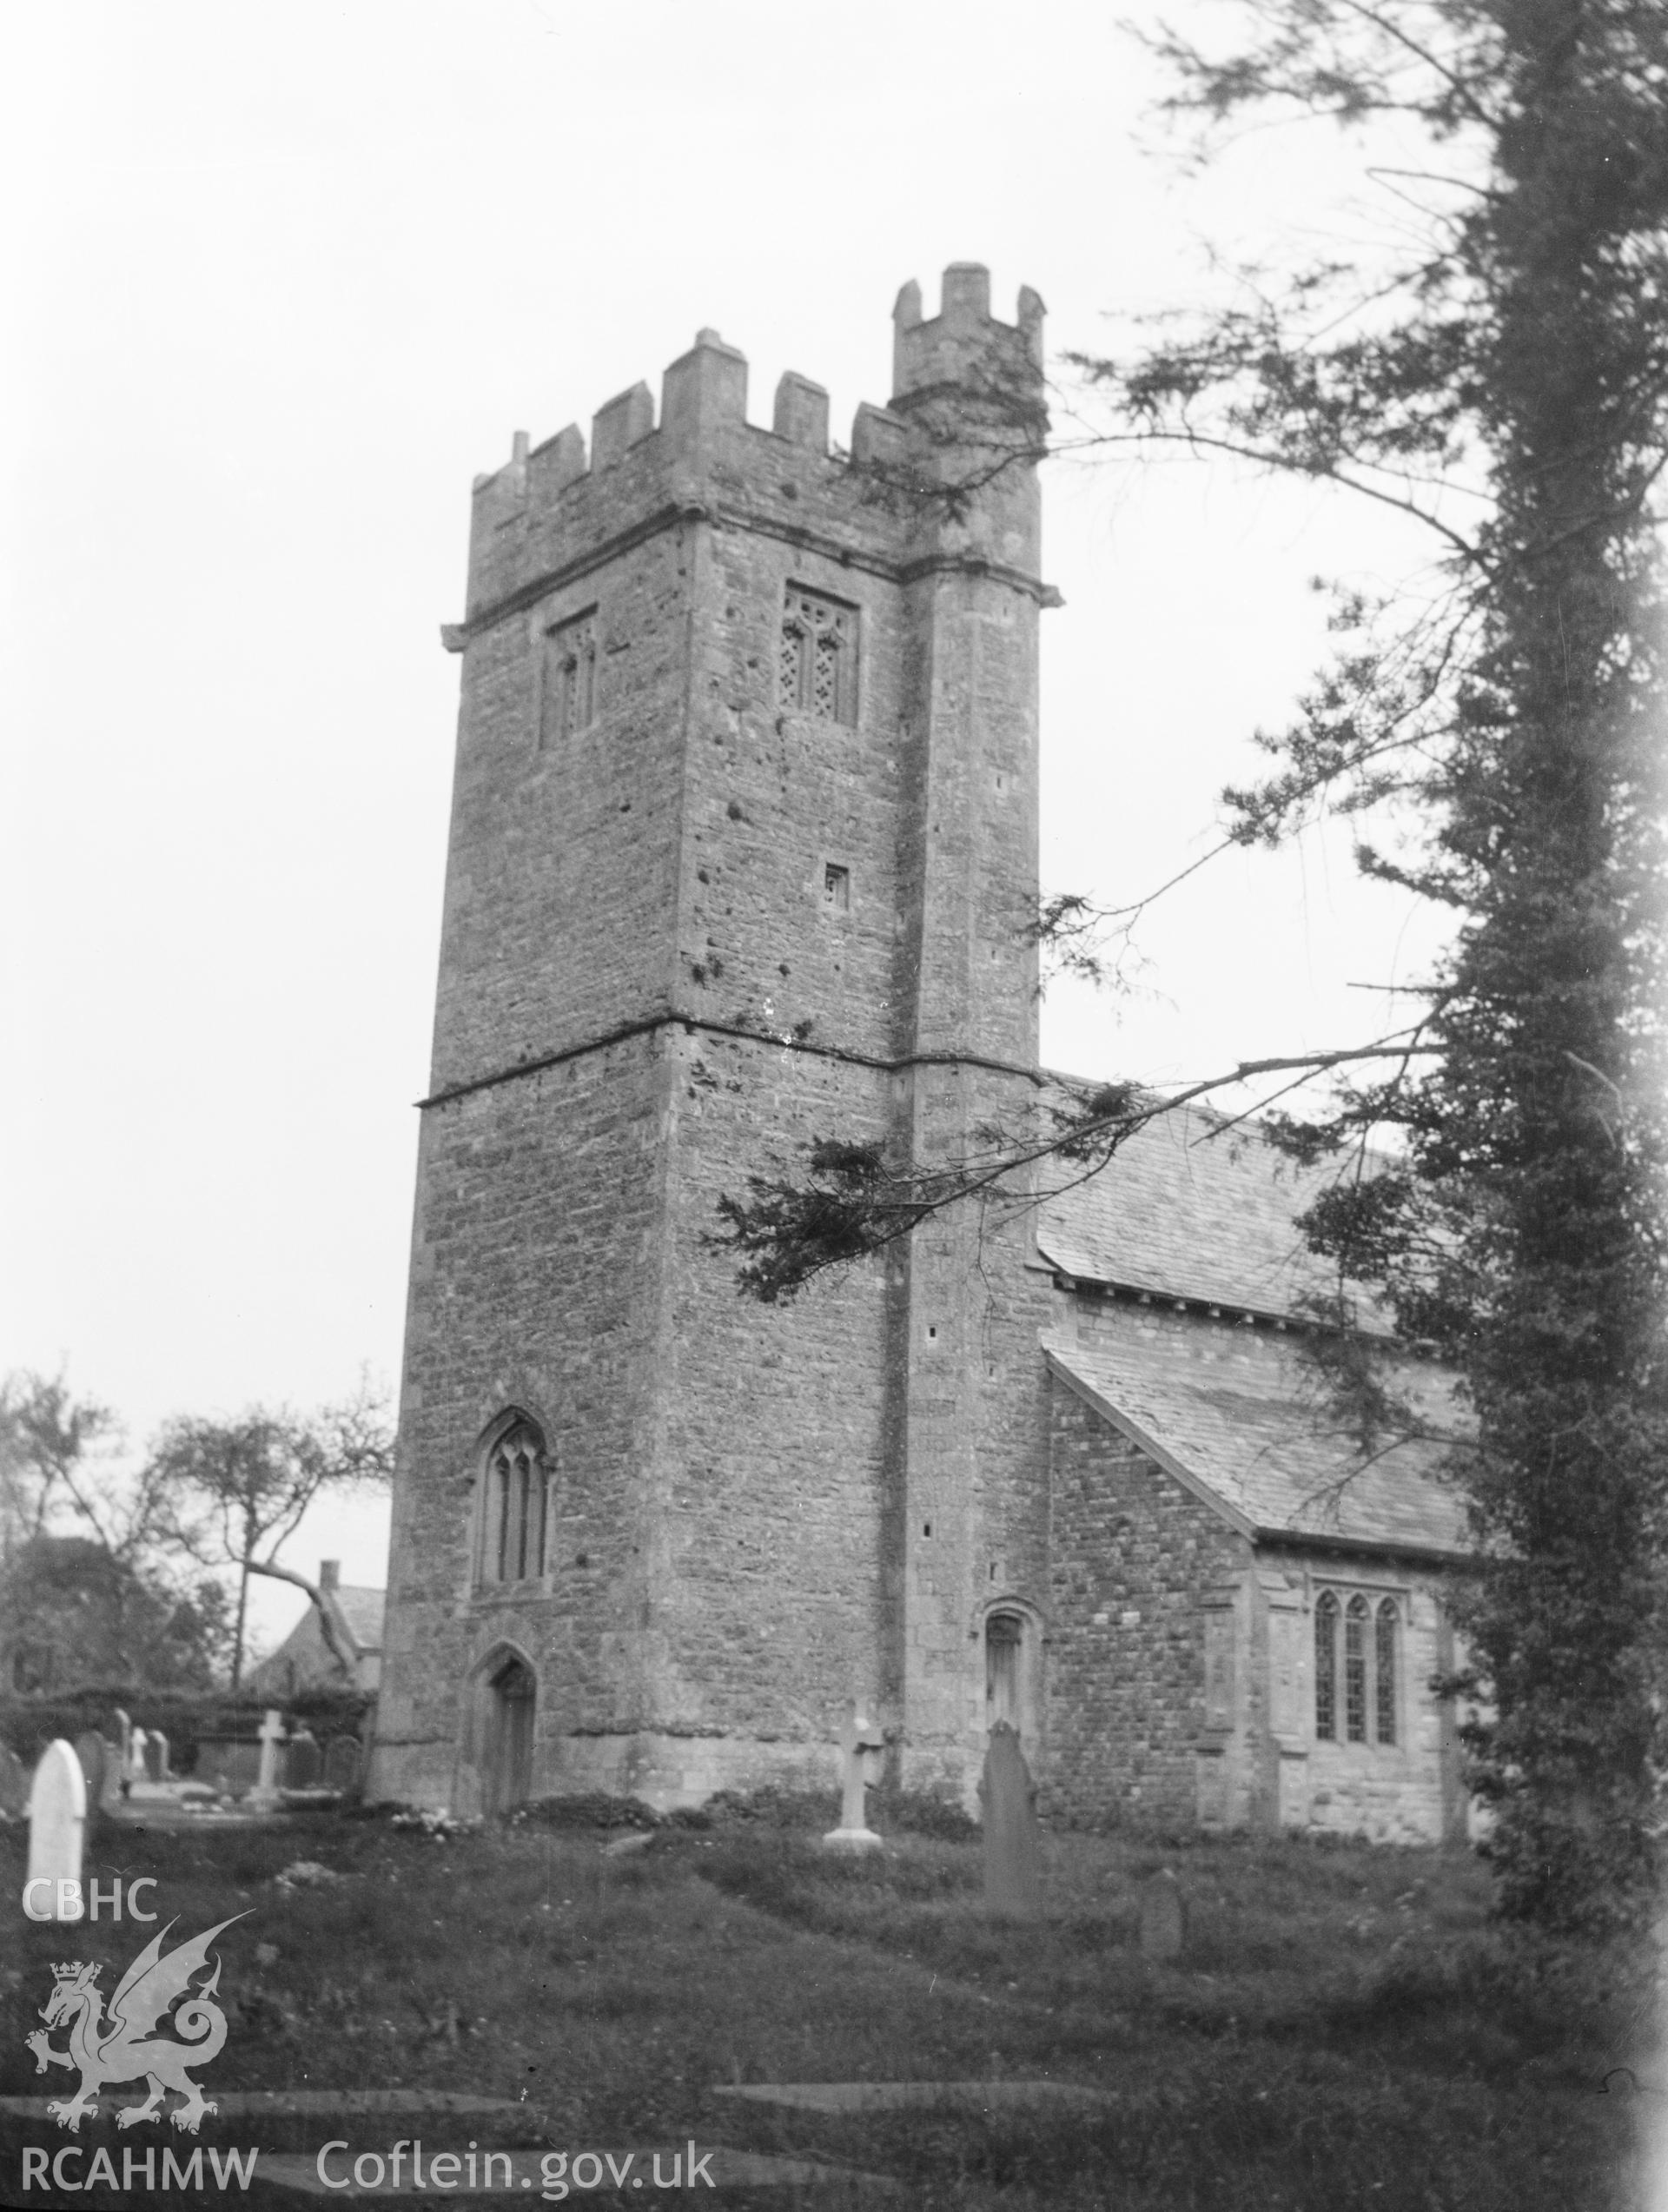 Digital copy of a nitrate negative showing exterior view of tower of St Stephen's Church, Caerwent, taken circa 1935. From the National Building Record Postcard Collection.